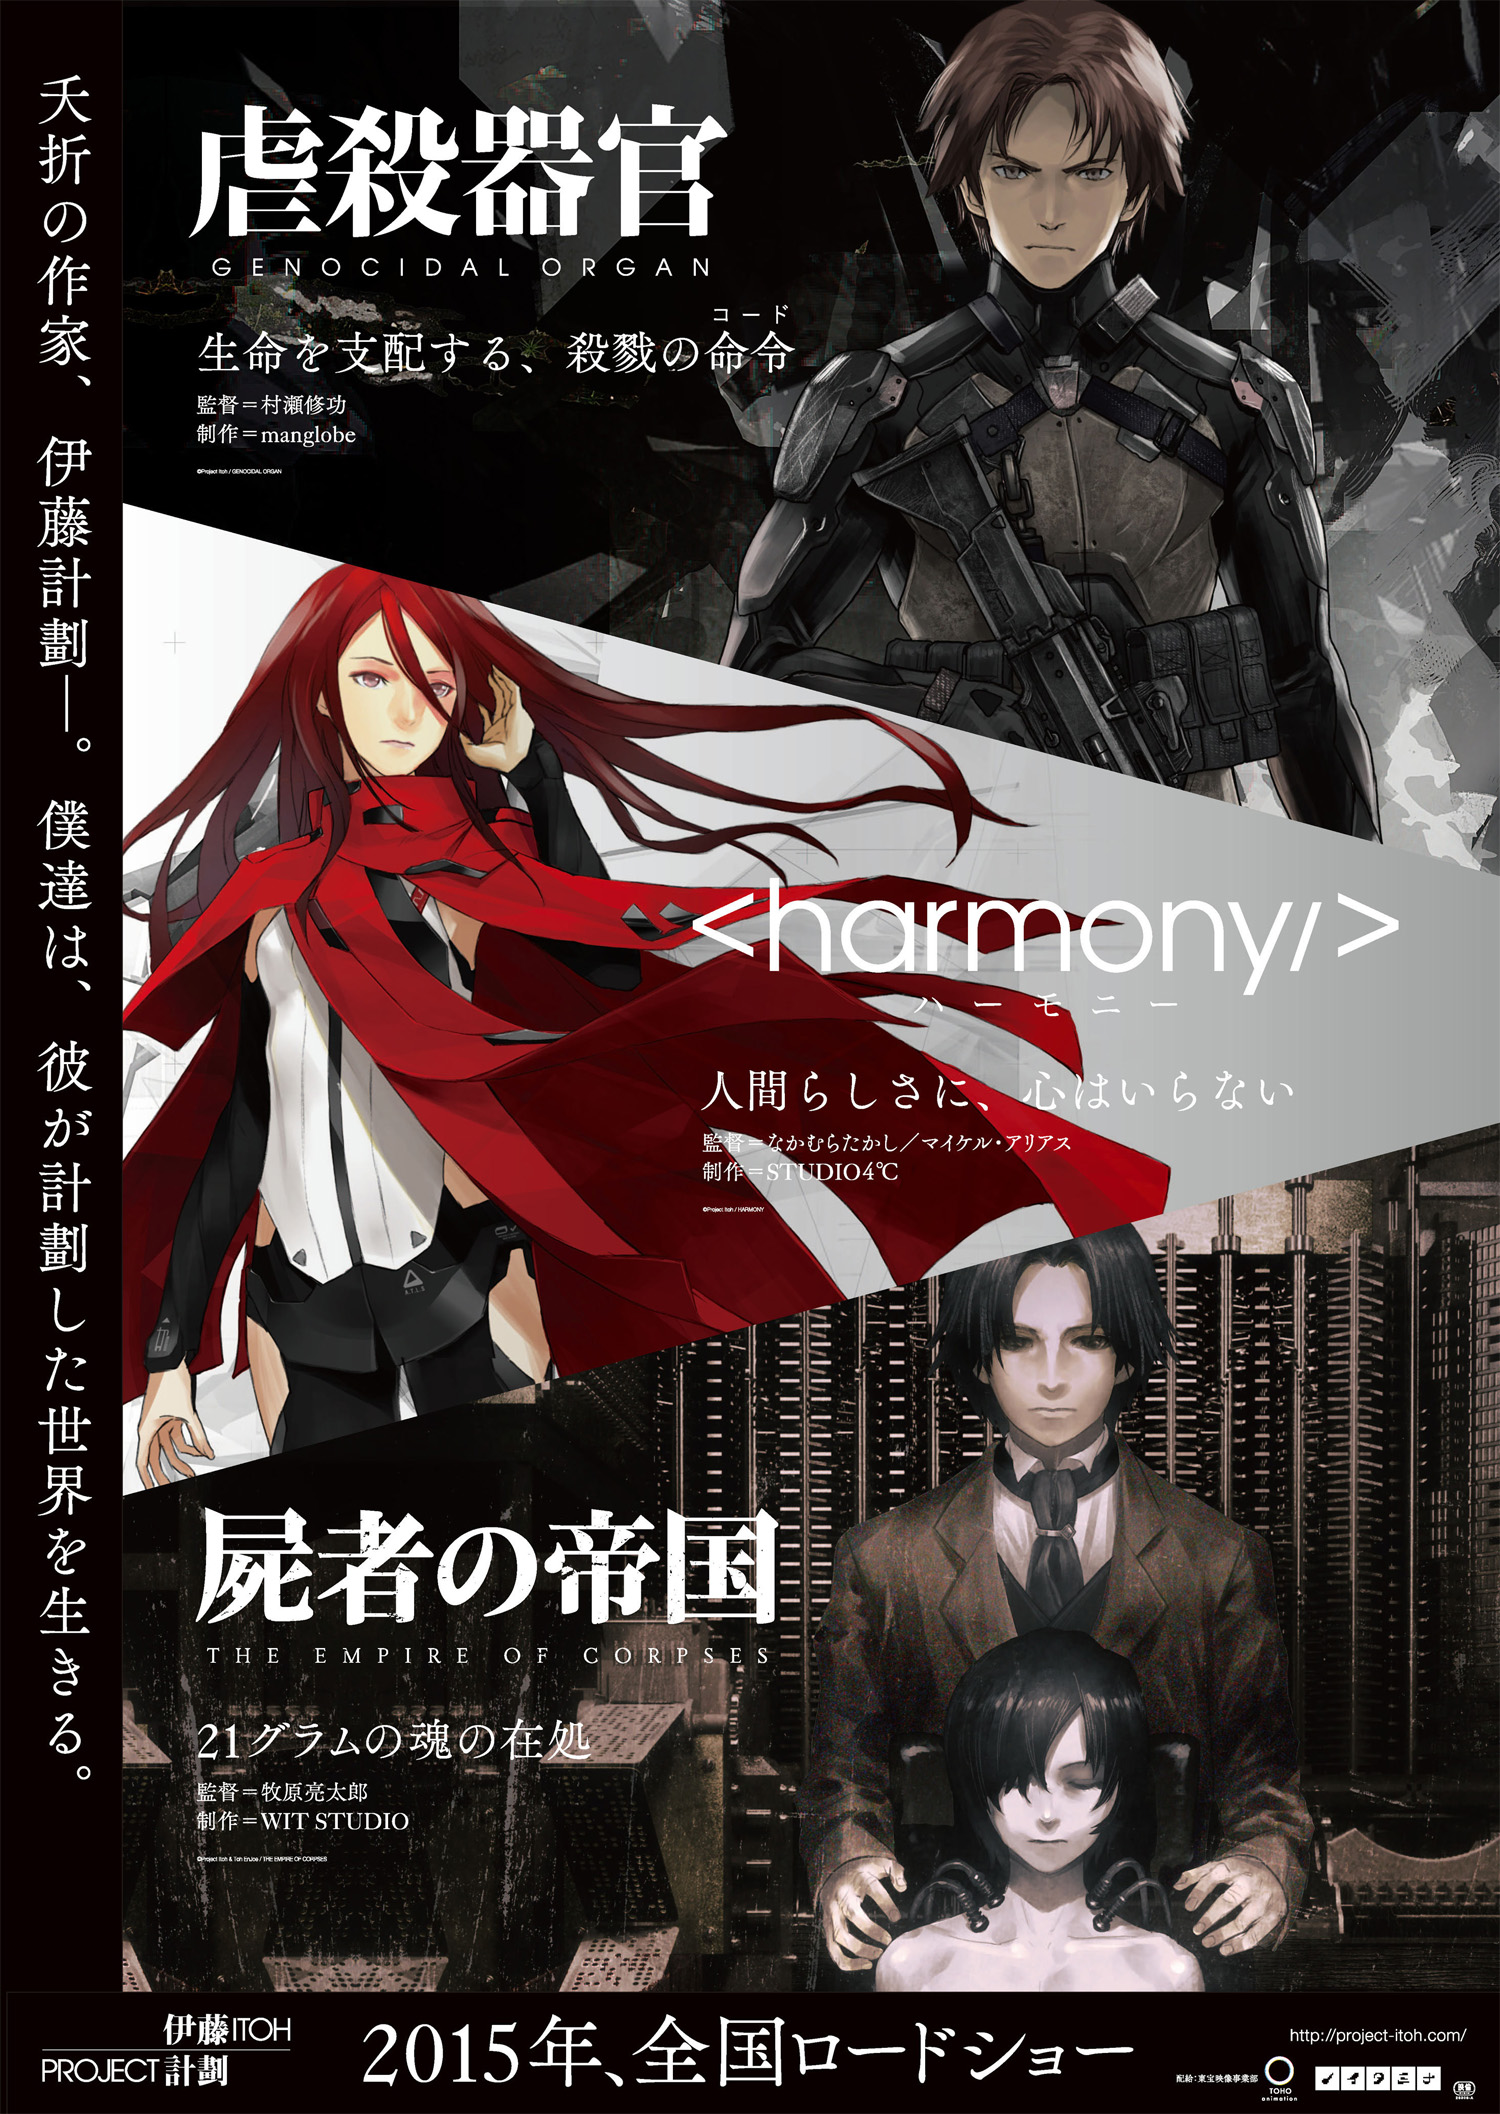 The Empire Of Corpses Art Wallpapers